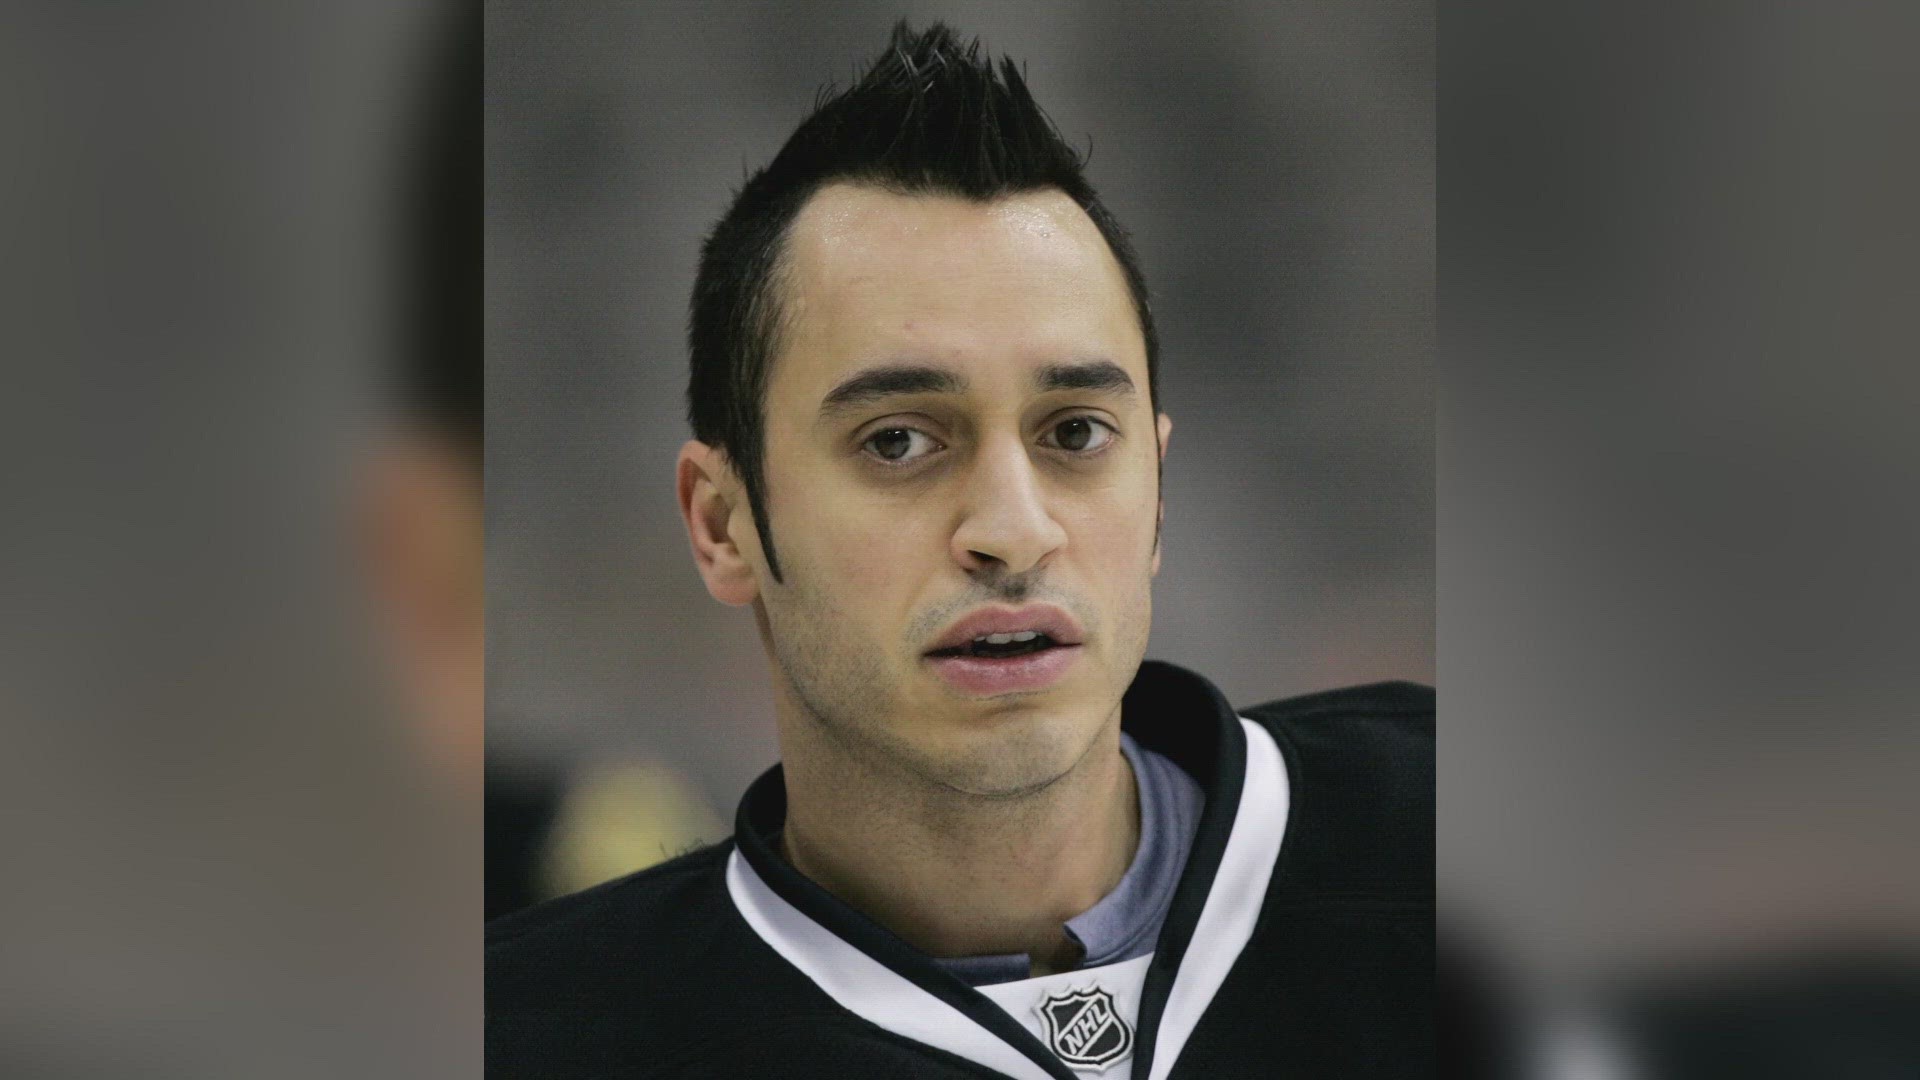 Mike Ribeiro, 43, was in court Wednesday facing two counts of sexual assault and one count of attempted sexual assault.